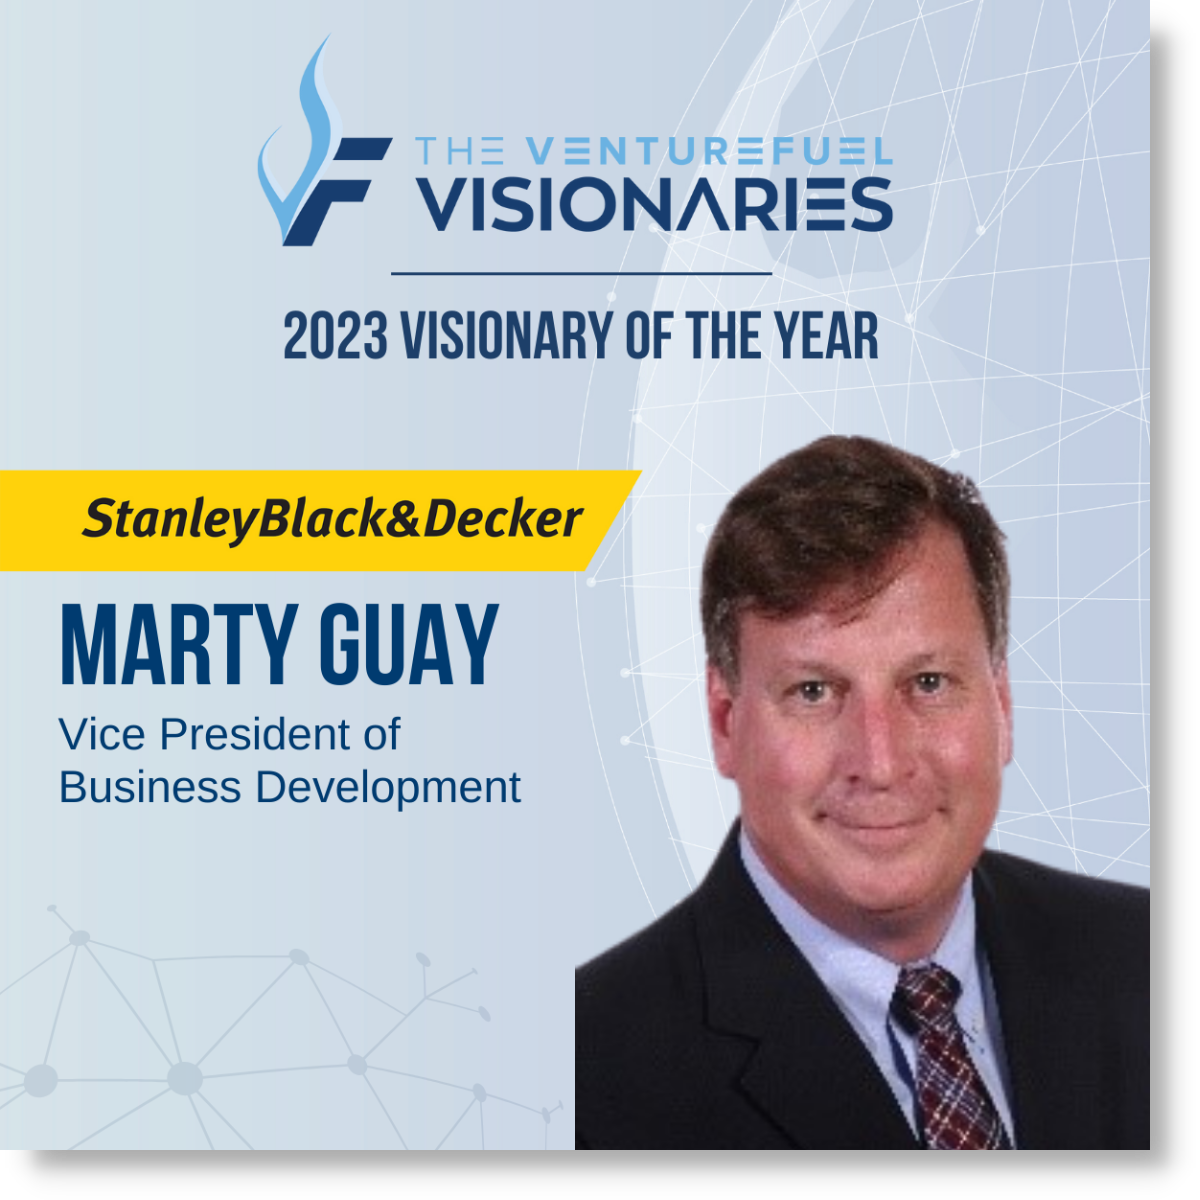 2023 Visionary of the Year Marty Guay